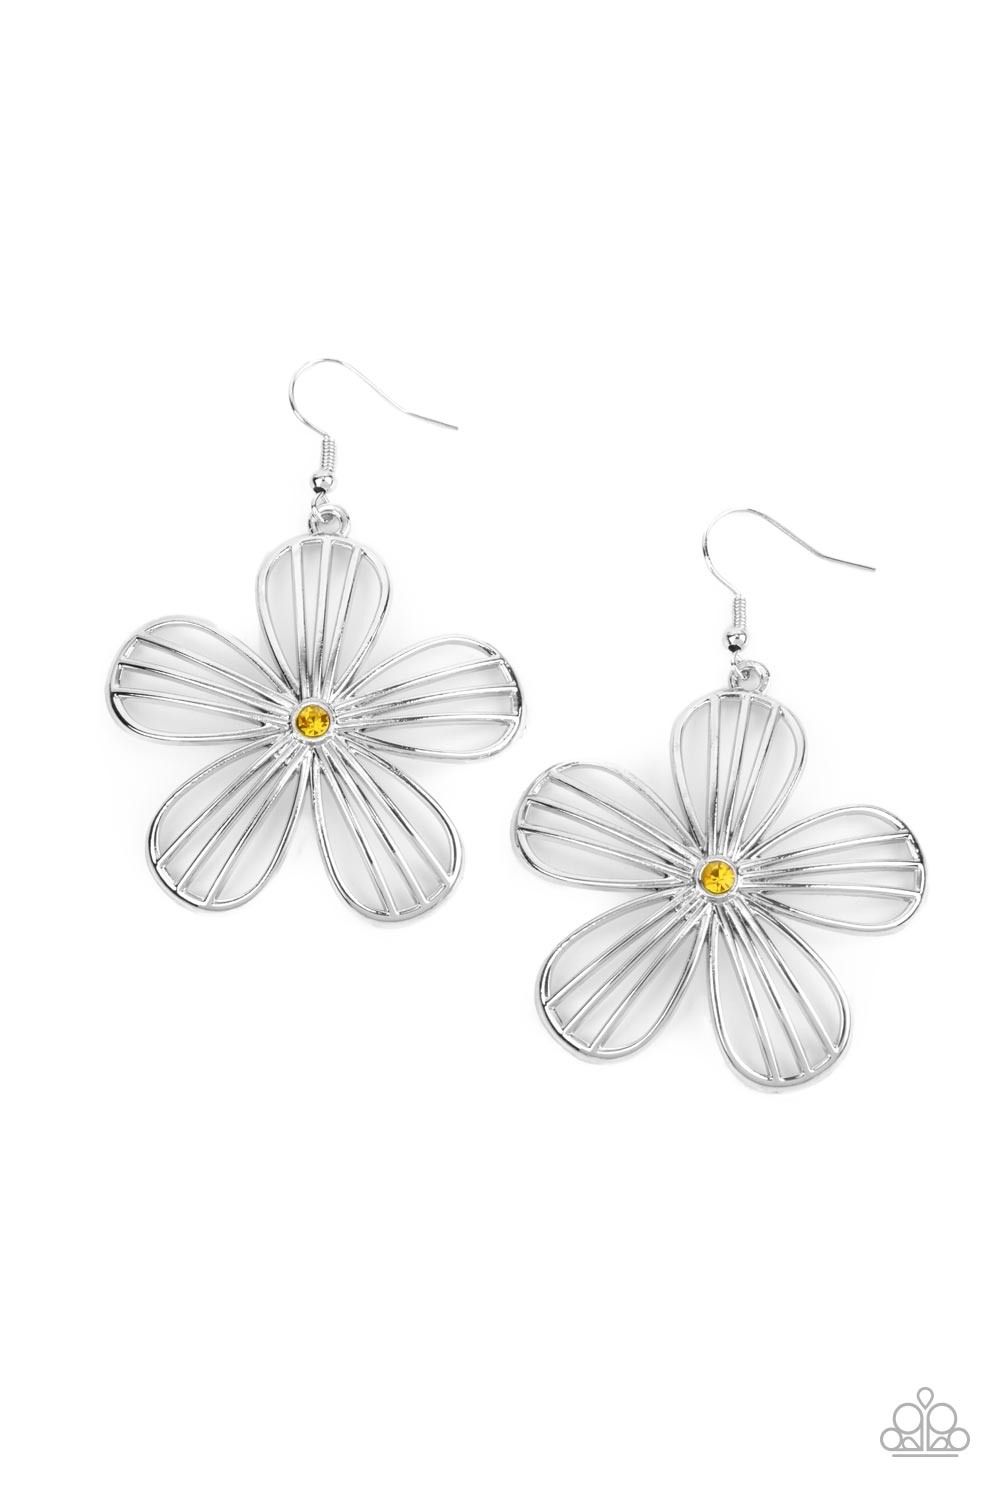 Meadow Musical - Yellow and Silver Floral Earrings - Paparazzi Accessories - Dotted with a dainty yellow rhinestone, airy silver petals streaked with linear bars bloom into an enchanting floral frame.